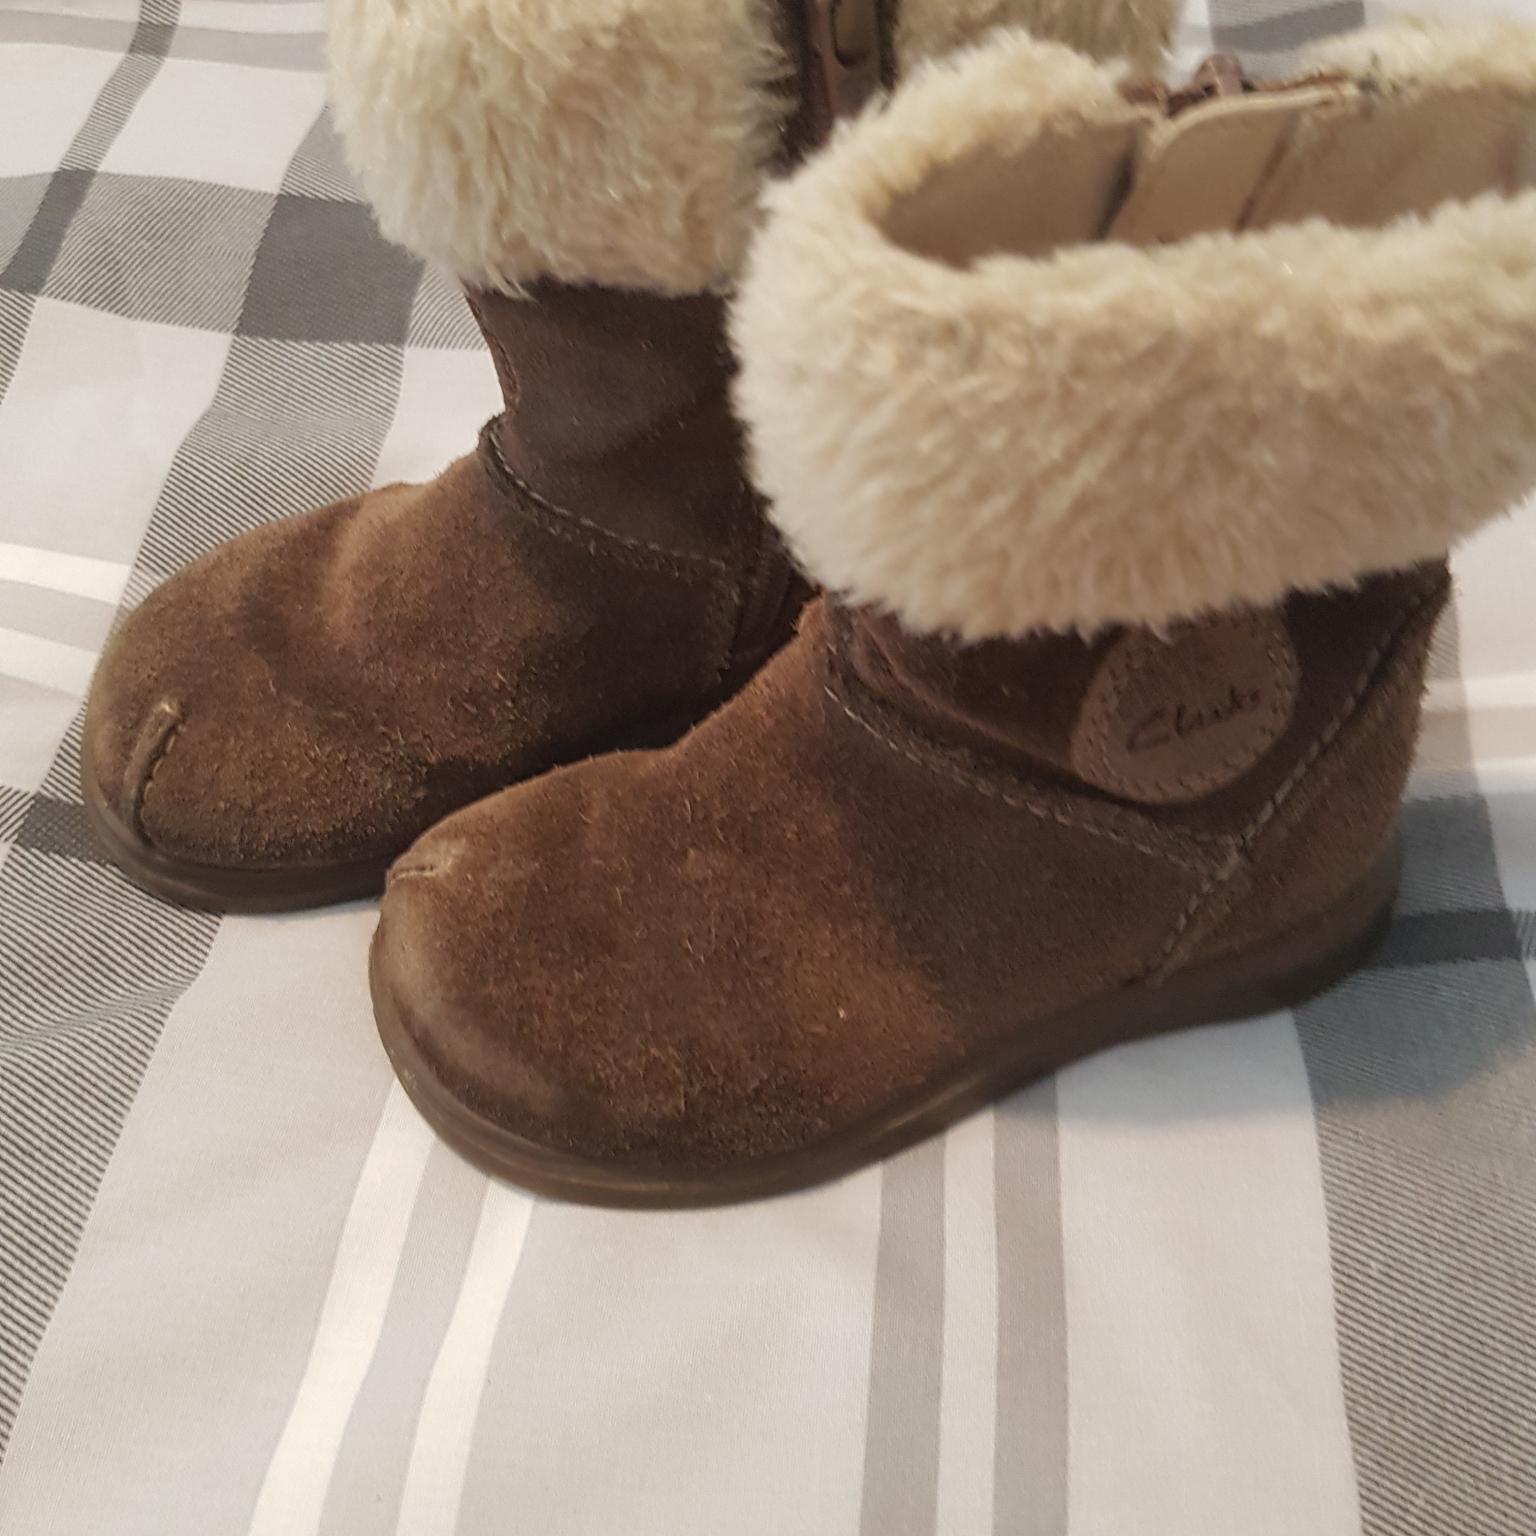 boots for baby girl size 5